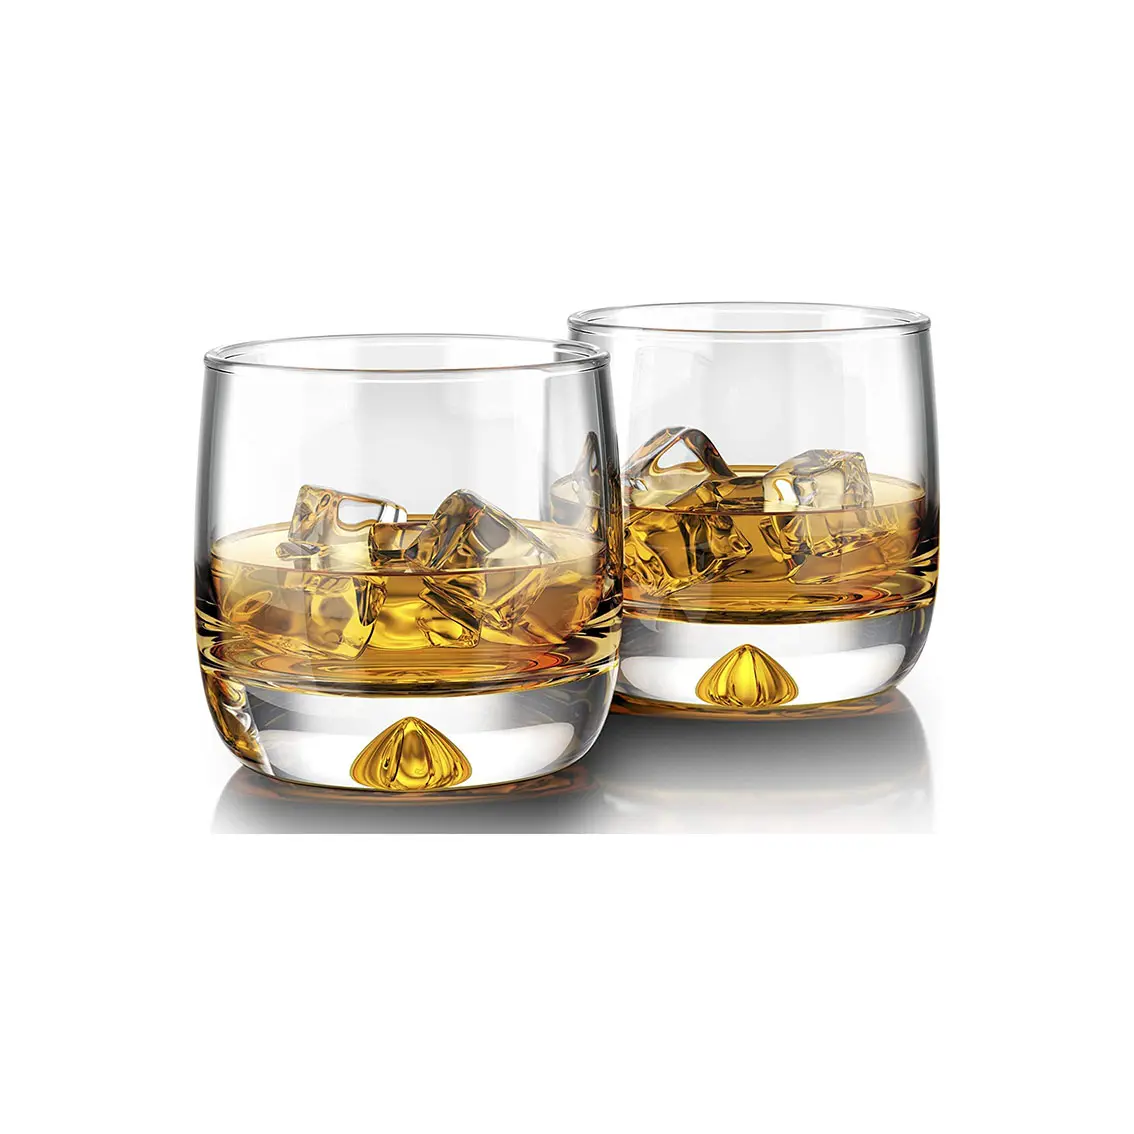 11 oz commercial old fashioned crystal whiskey glass tumbler